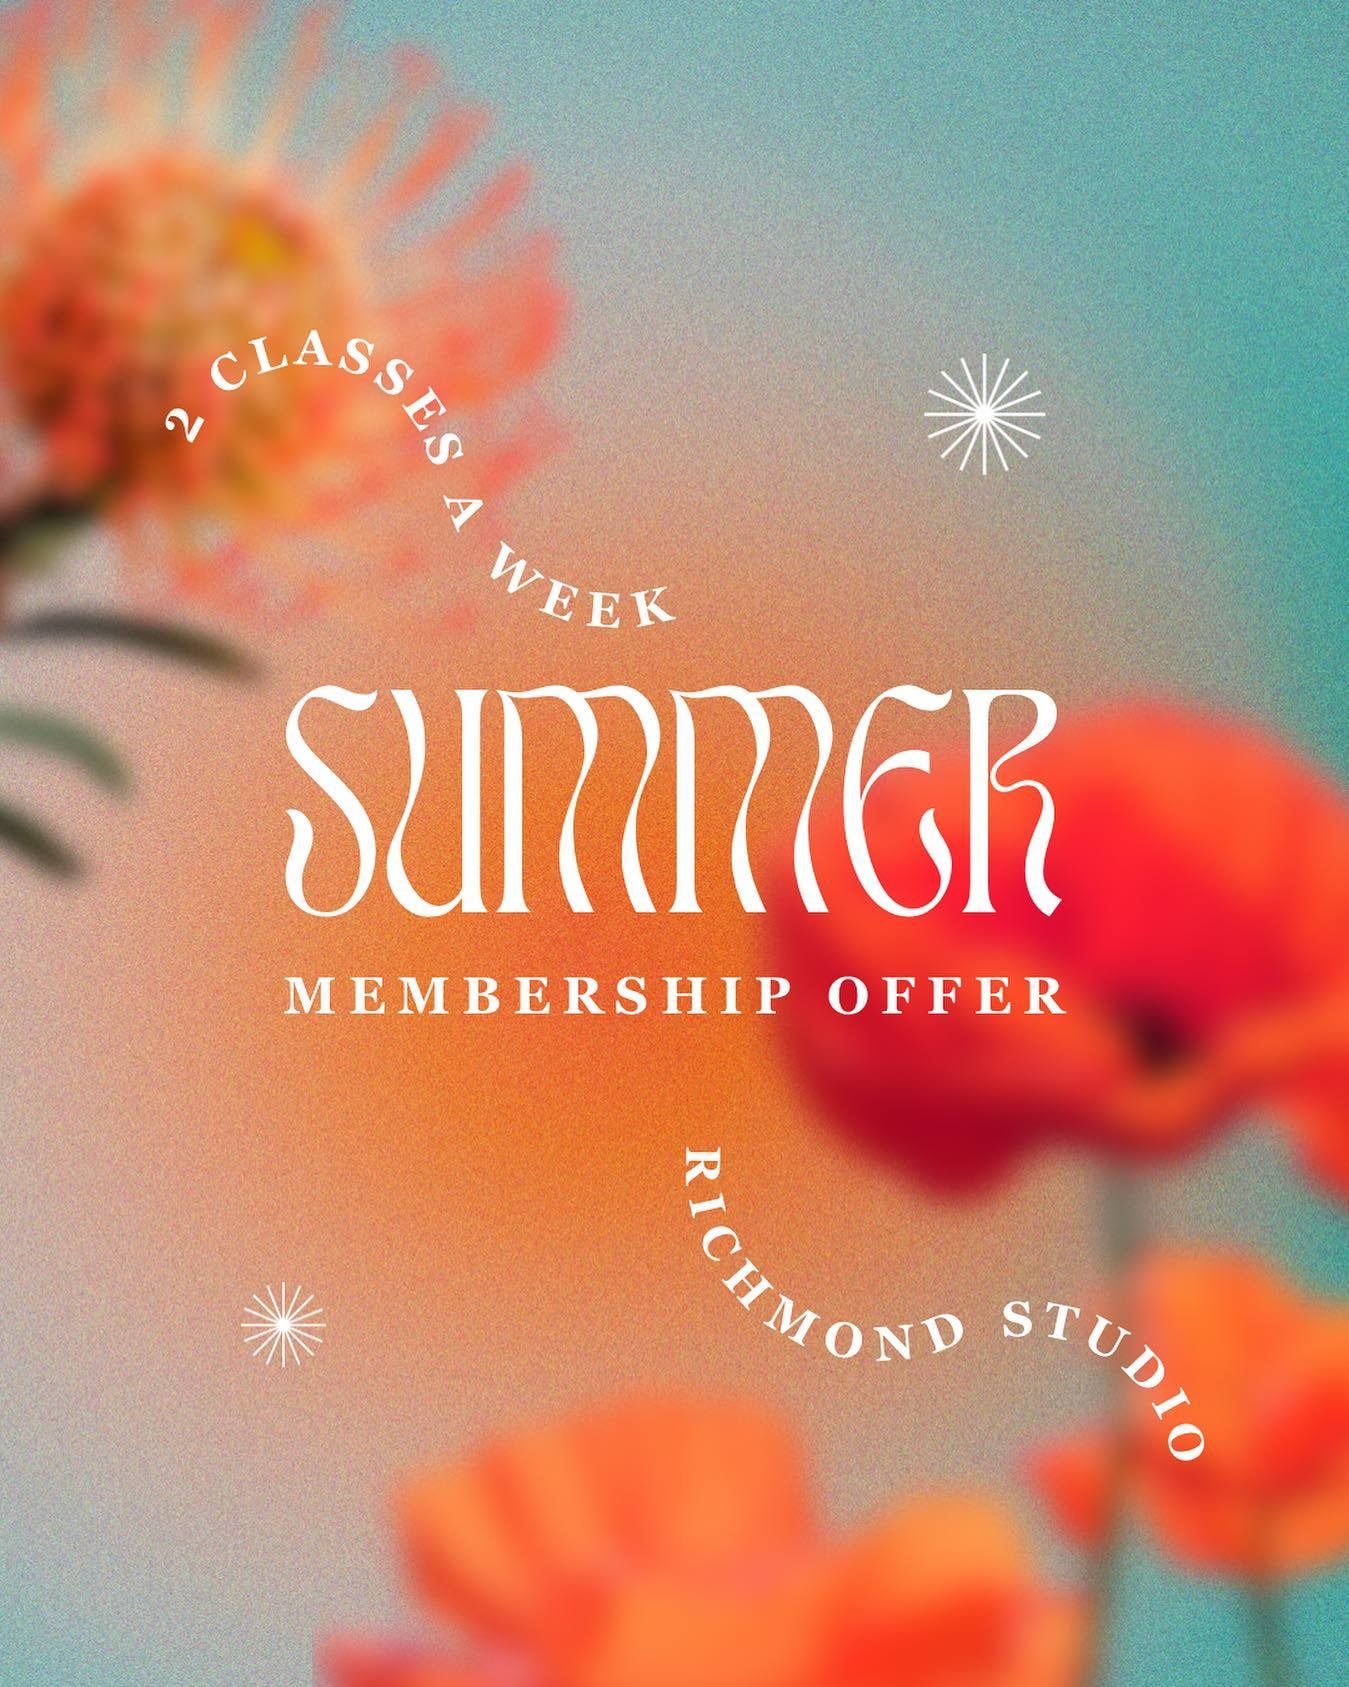 Our new Summer Membership offer features 2 classes a week for just $30 on auto debit! ☀️ This extra special membership is here for those busy bees in summer who still want to practice 2x a week! 

This is also our way to support our community &amp; o